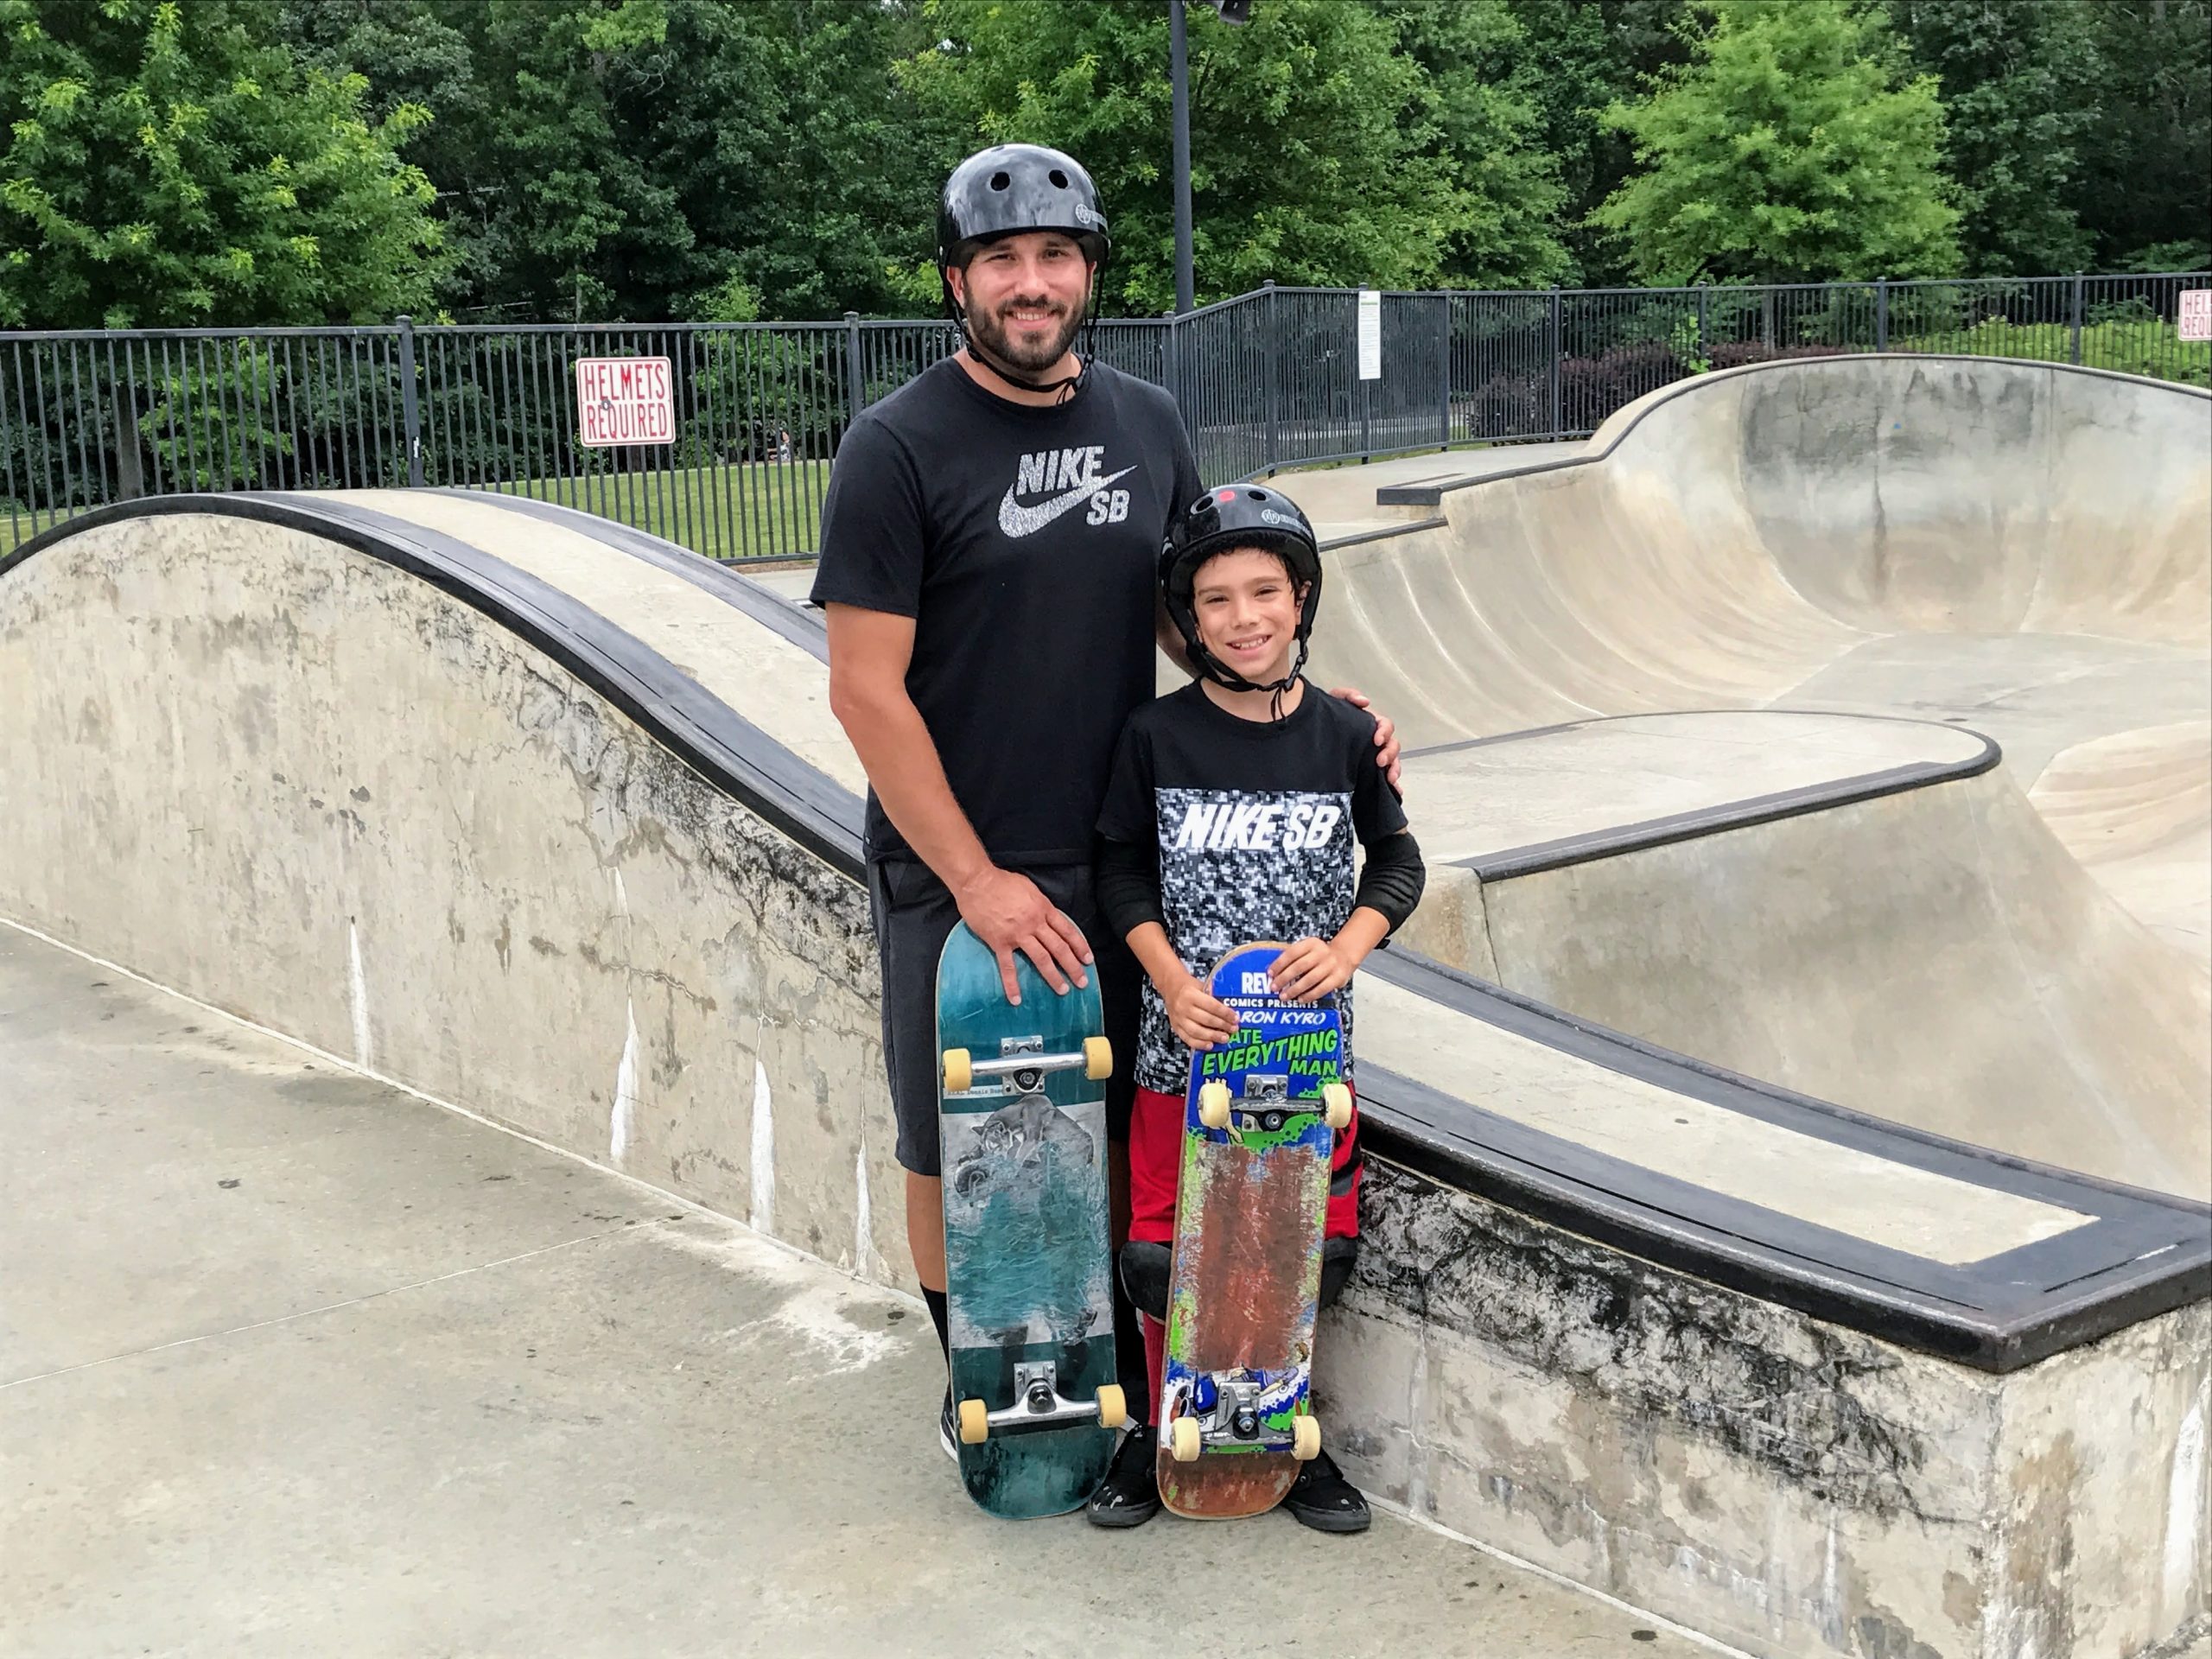 Landon pauses to smile with his dad, Michael, at a skate park in Atlanta.
Photography courtesy of Michael Zanfardino